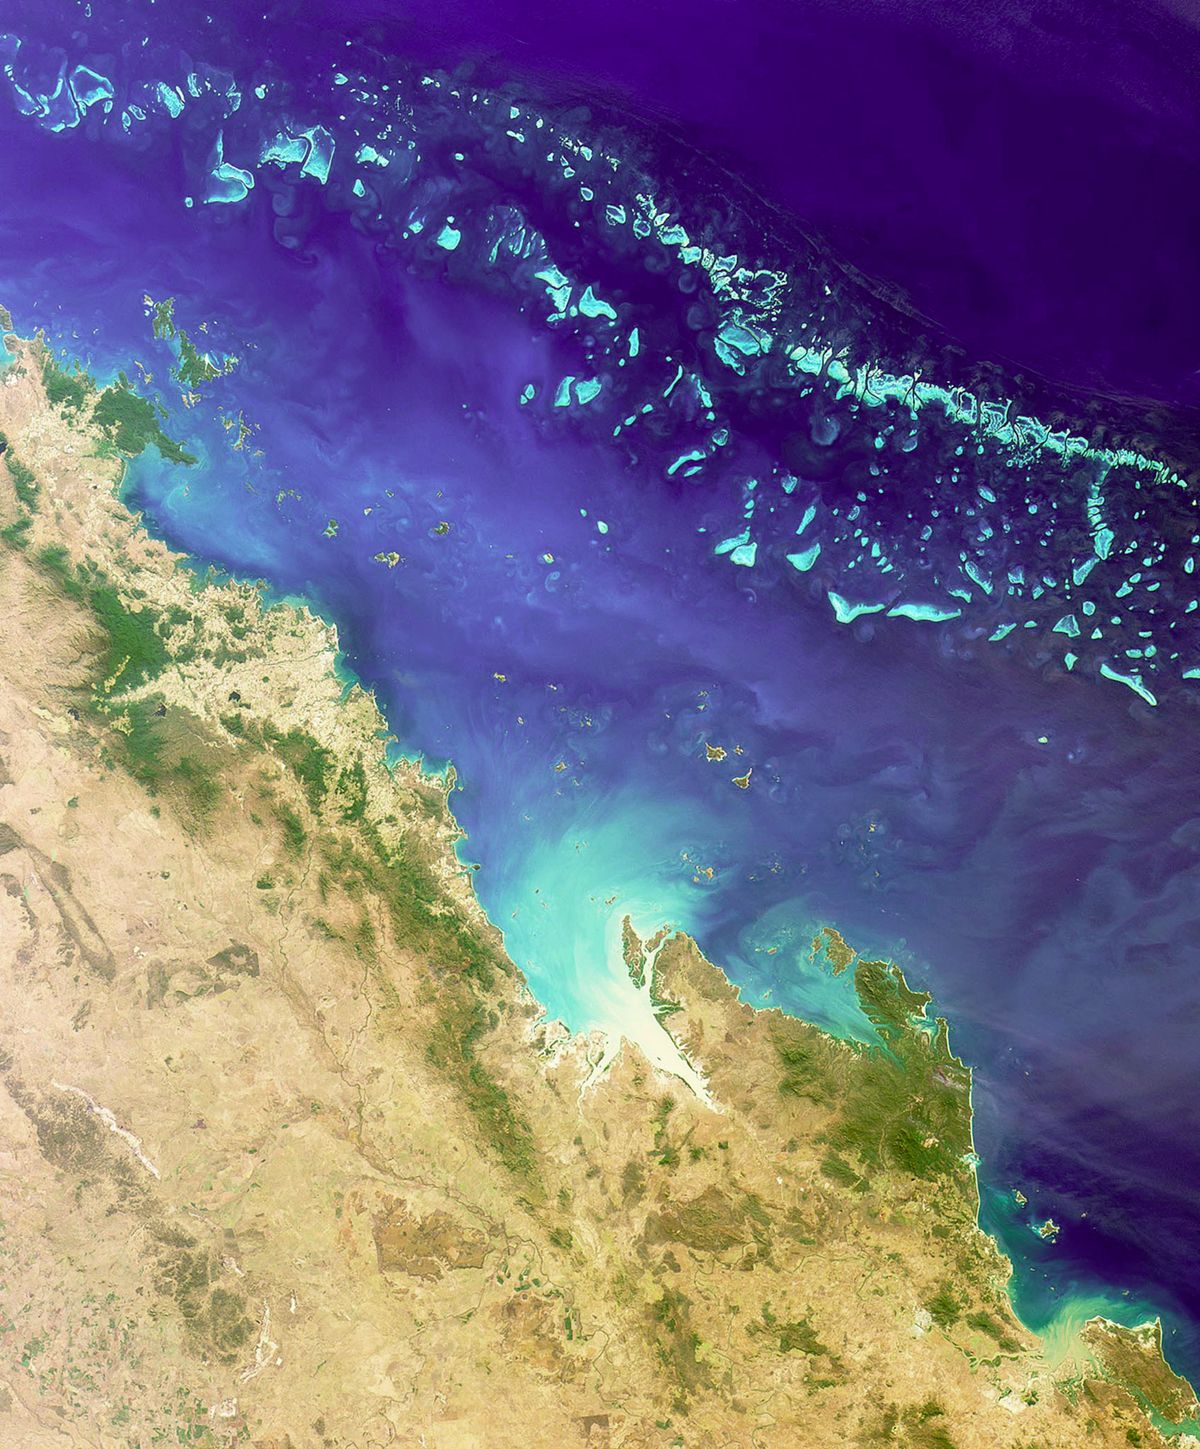 This image taken from NASA's Earth Obeservatory Internet site shows the Great Barrier Reef, that extends for 1,242 miles (2,000 km) along the northeastern coast of Australia. It is not a single reef, but a vast maze of reefs, passages, and coral cays (islands that are part of the reef). This true-color image was acquired by the Multi-angle Imaging Spectroradiometer (MISR) instrument on August 26, 2000, and shows part of the southern portion of the reef adjacent to the central Queensland coast. The width of the MISR swath is approximately 236 miles (380 kilometers), with the reef clearly visible up to approximately 124 miles (200 kilometers) from the coast. The large island off the most northerly part of the coast visible in this image is Whitsunday Island, with smaller islands and reefs extending southeast, parallel to the coast.  AFP PHOTO/ NASA (Photo by NASA / AFP)